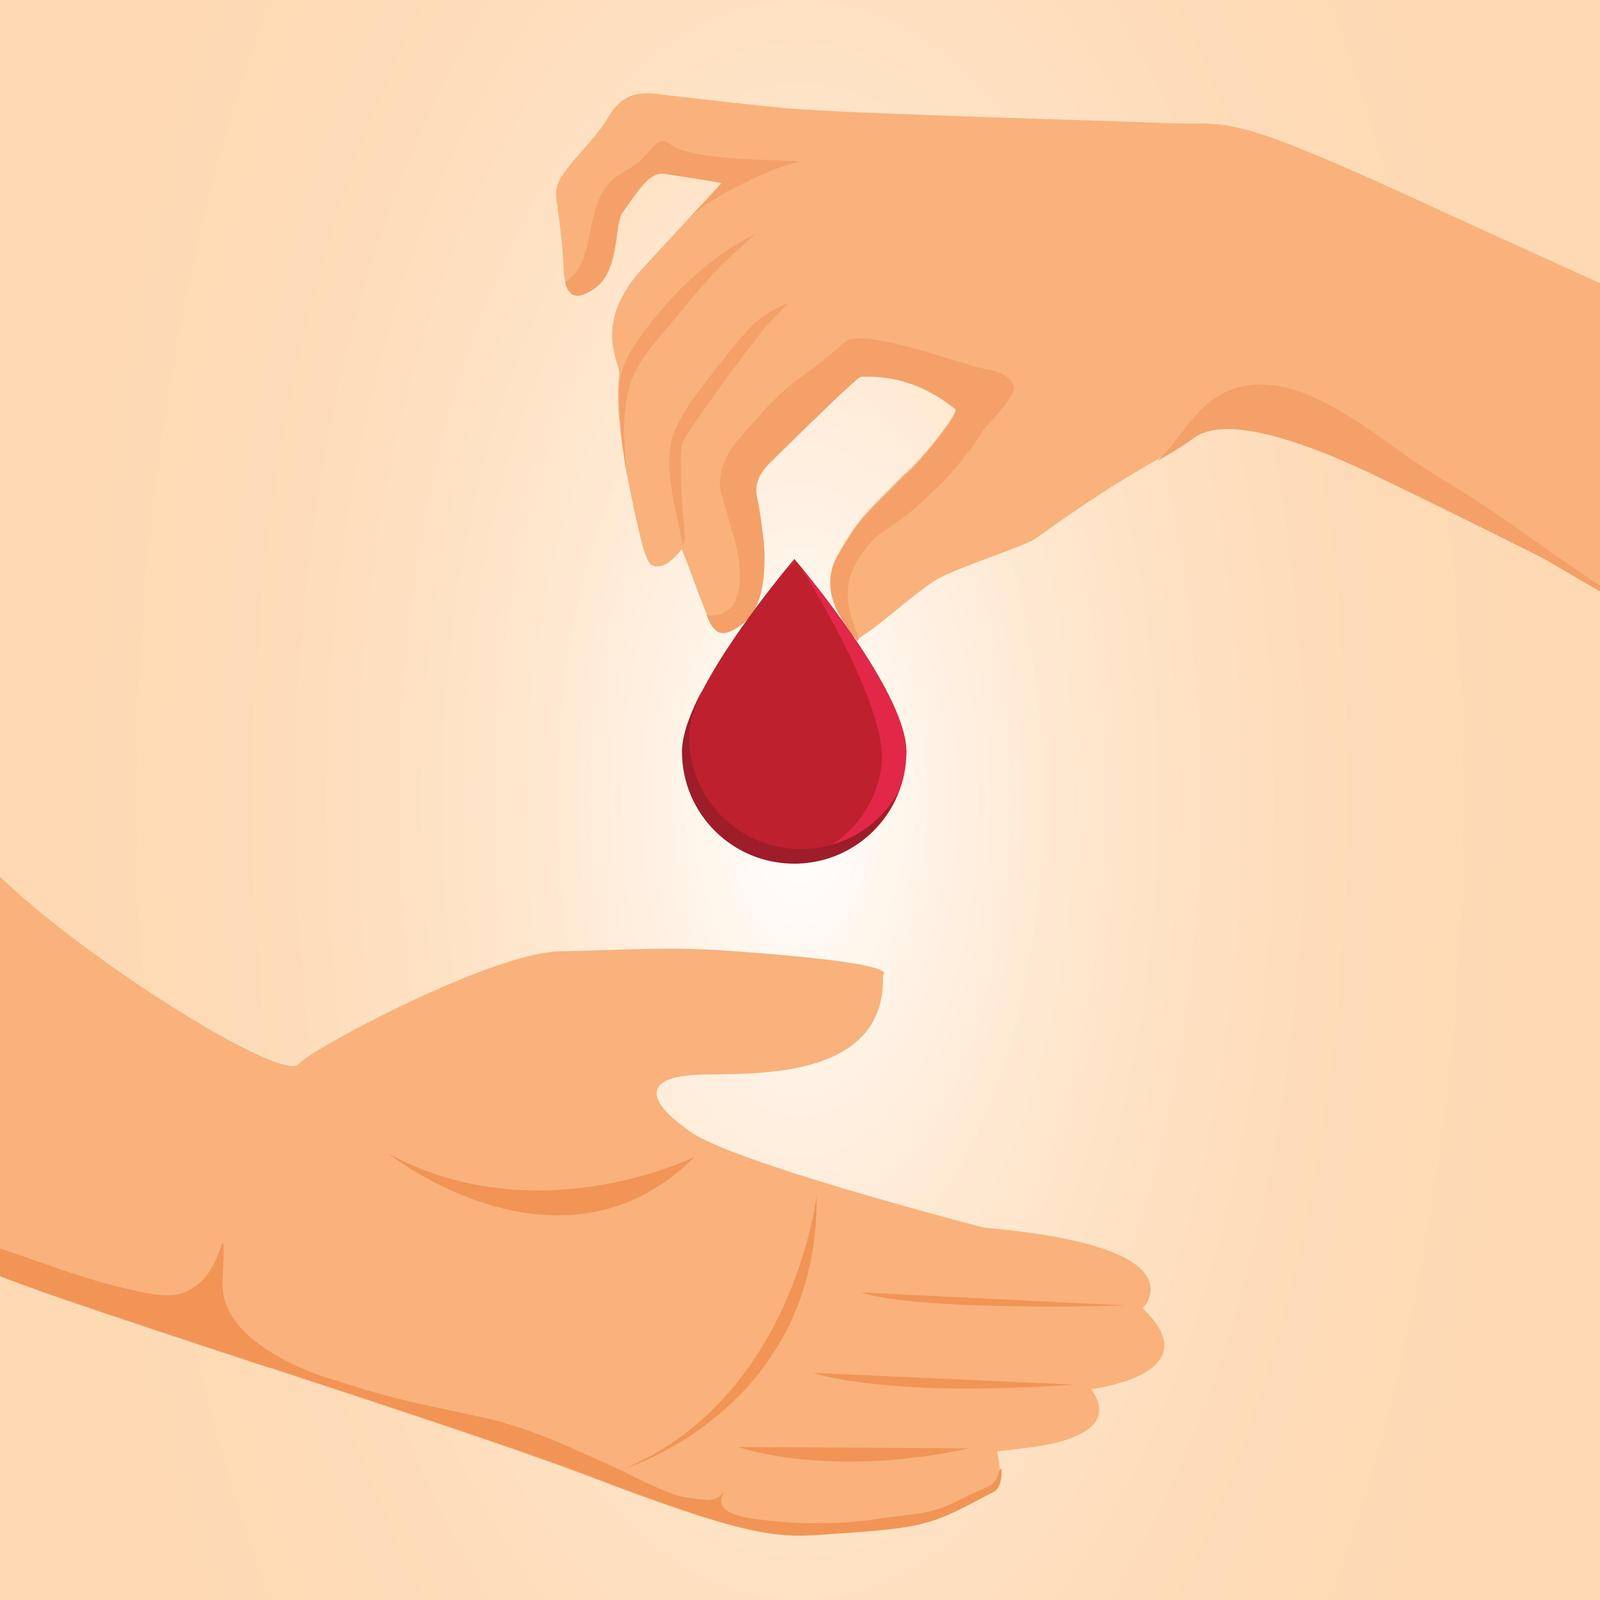 Hand giving, donate blood. World blood donor day concept. Red drop symbol of volunteer blood donation. Vector illustration